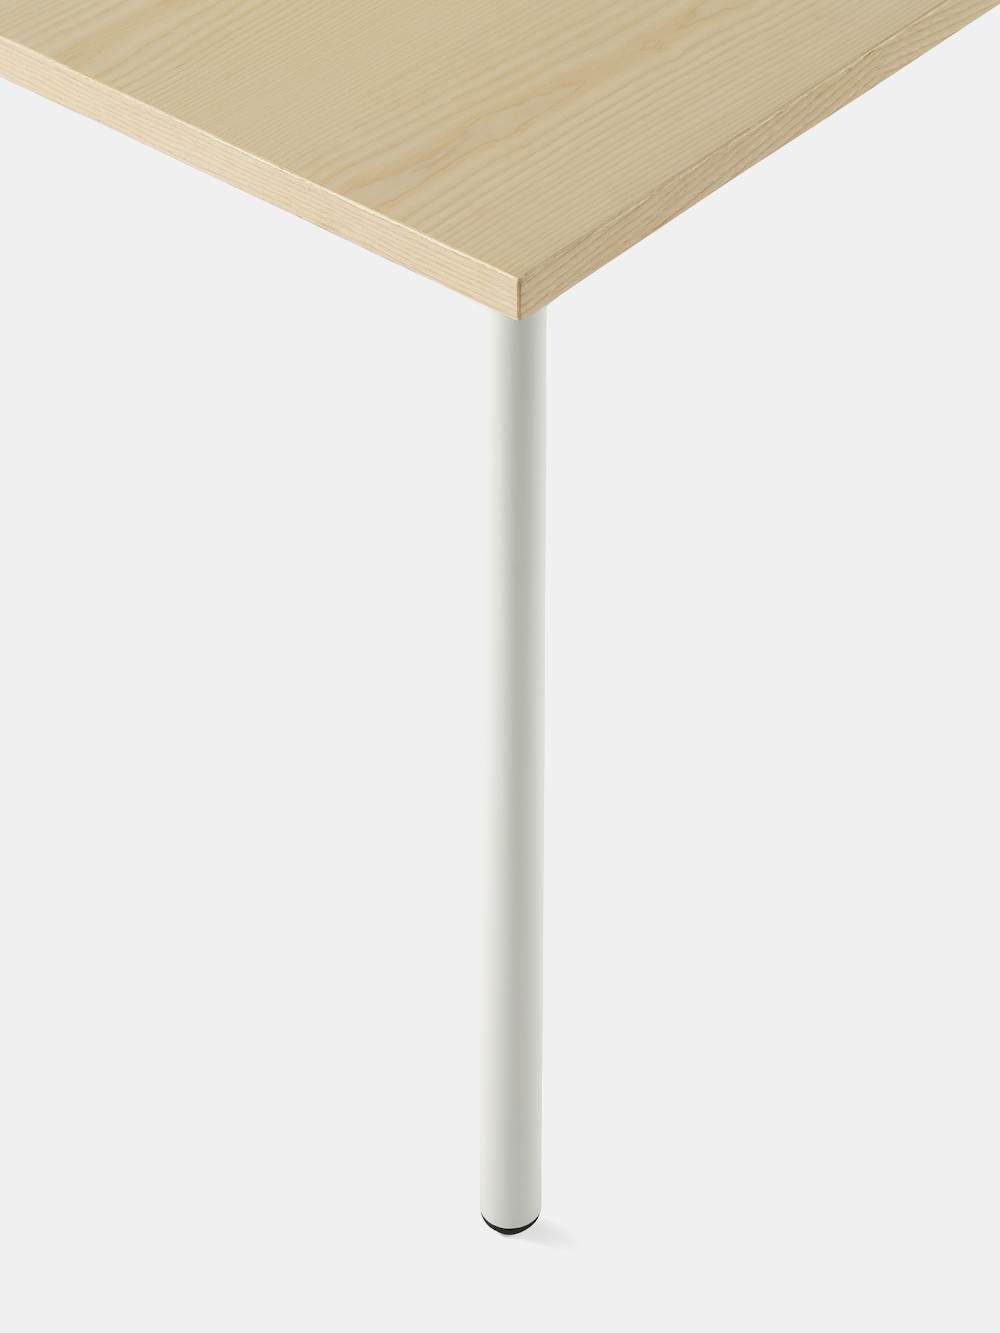 OE1 Rectangular Table with light brown surface and white legs with an up close view of the rounded leg.